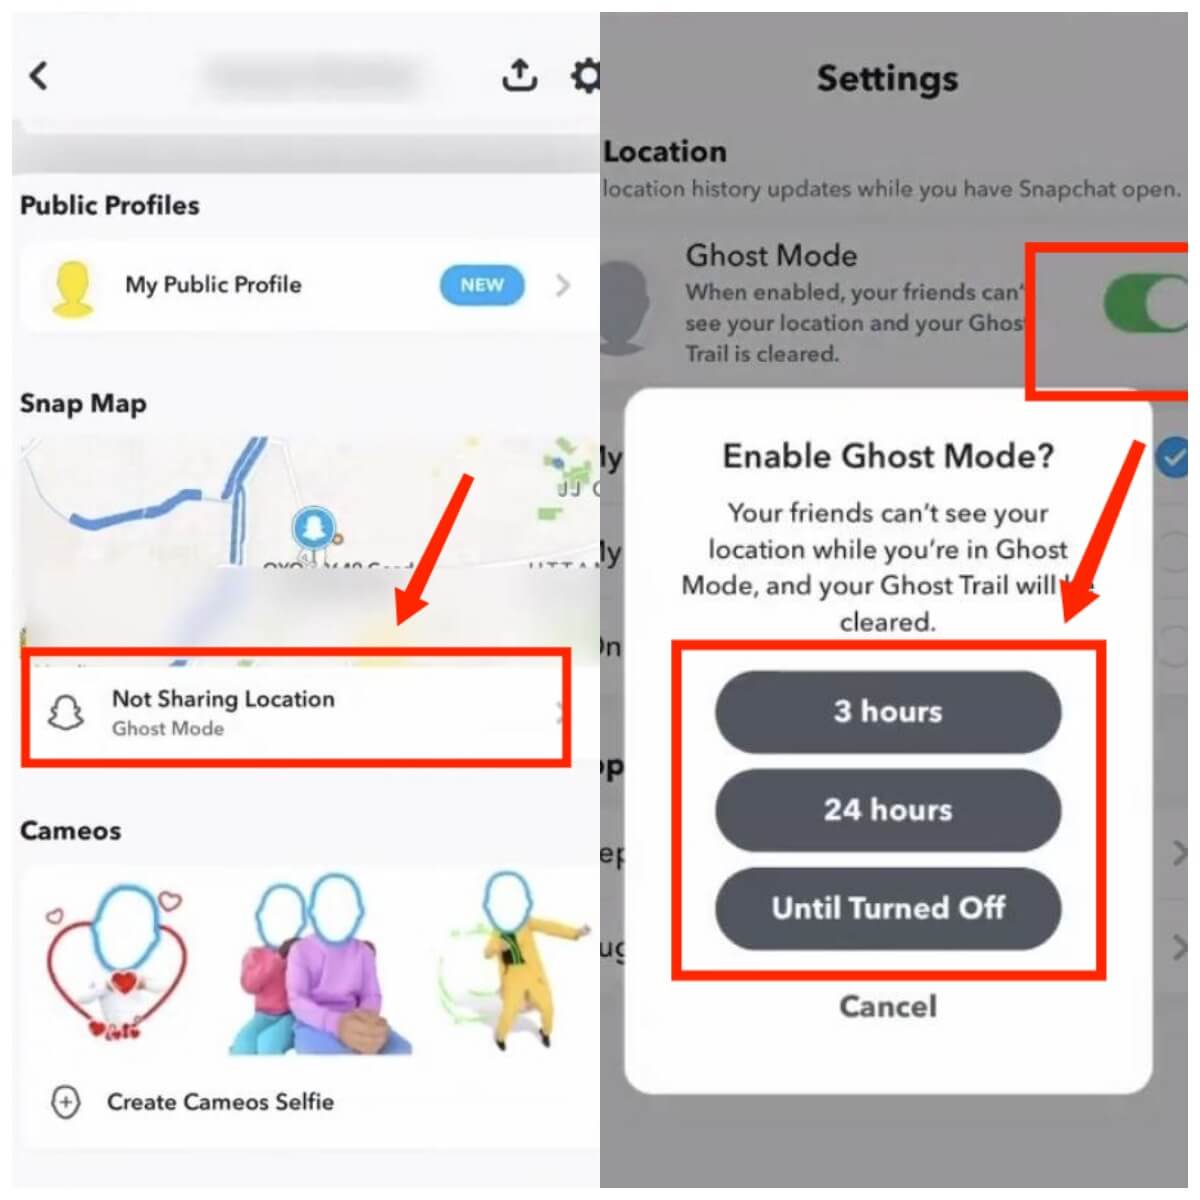 How to turn off location on Snapchat by turning on Ghost Mode